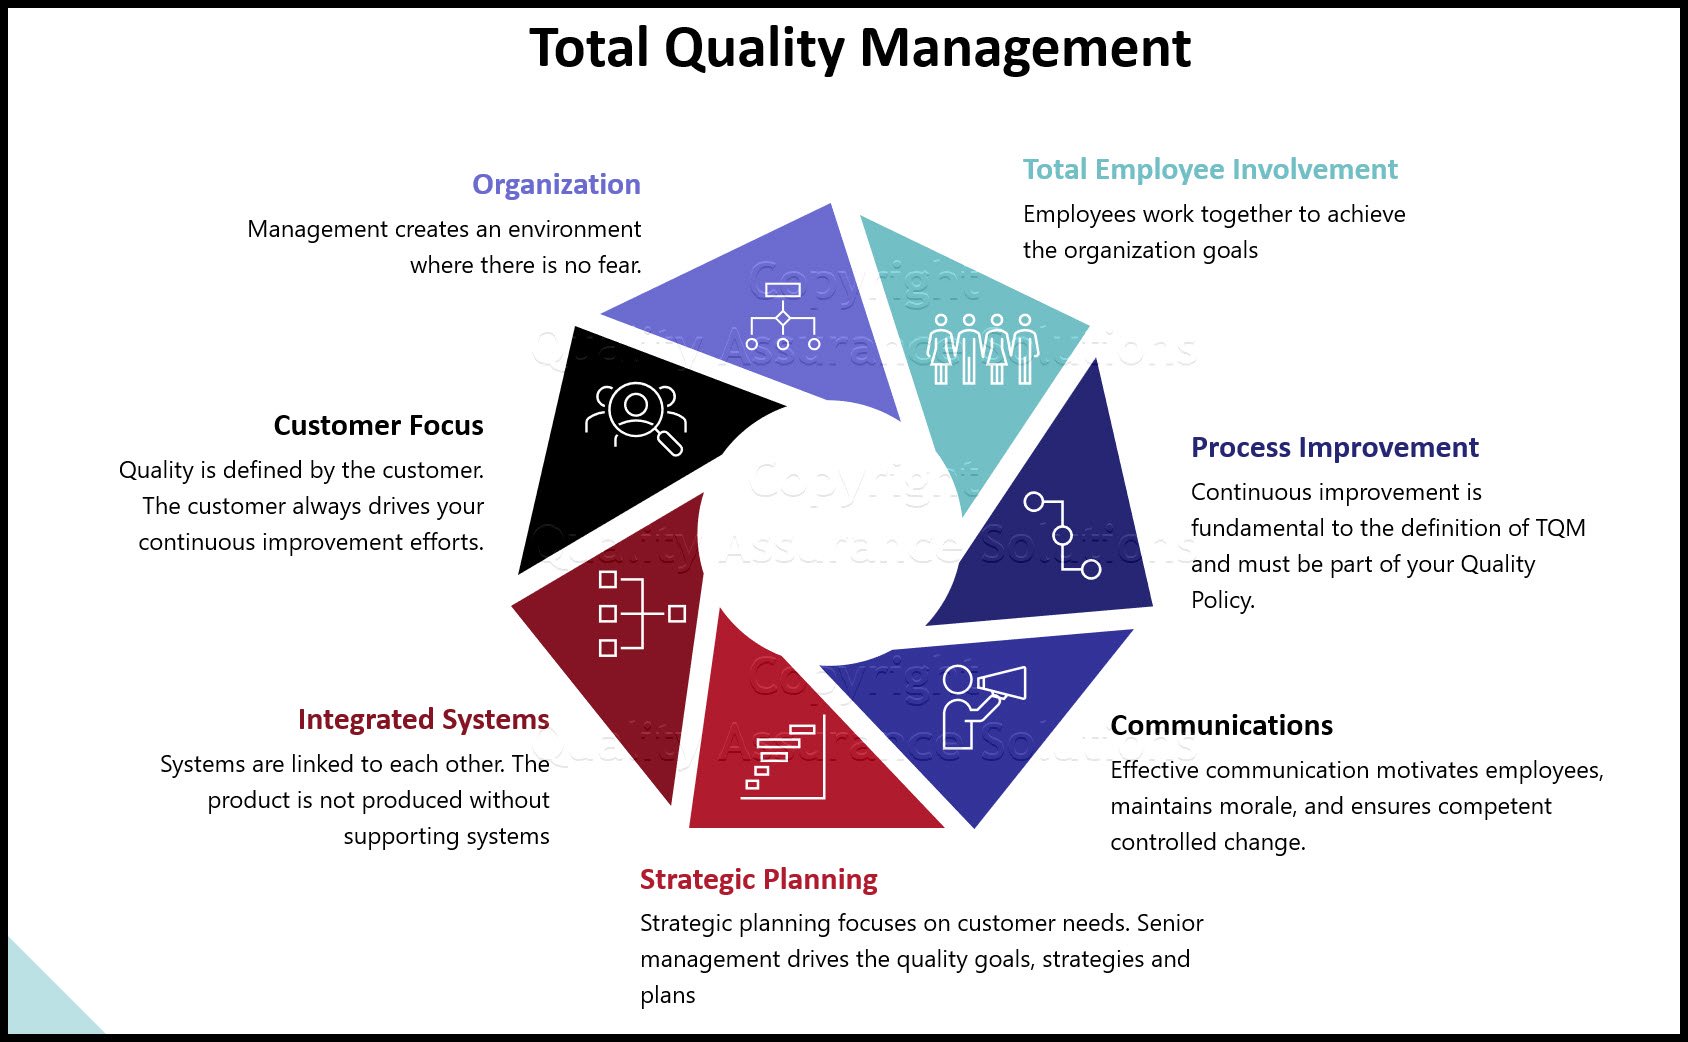 Do you need the definition of TQM or Total Quality Management? TQM, ISO 9001 and Quality Assurance are all linked together. See here for TQM elements